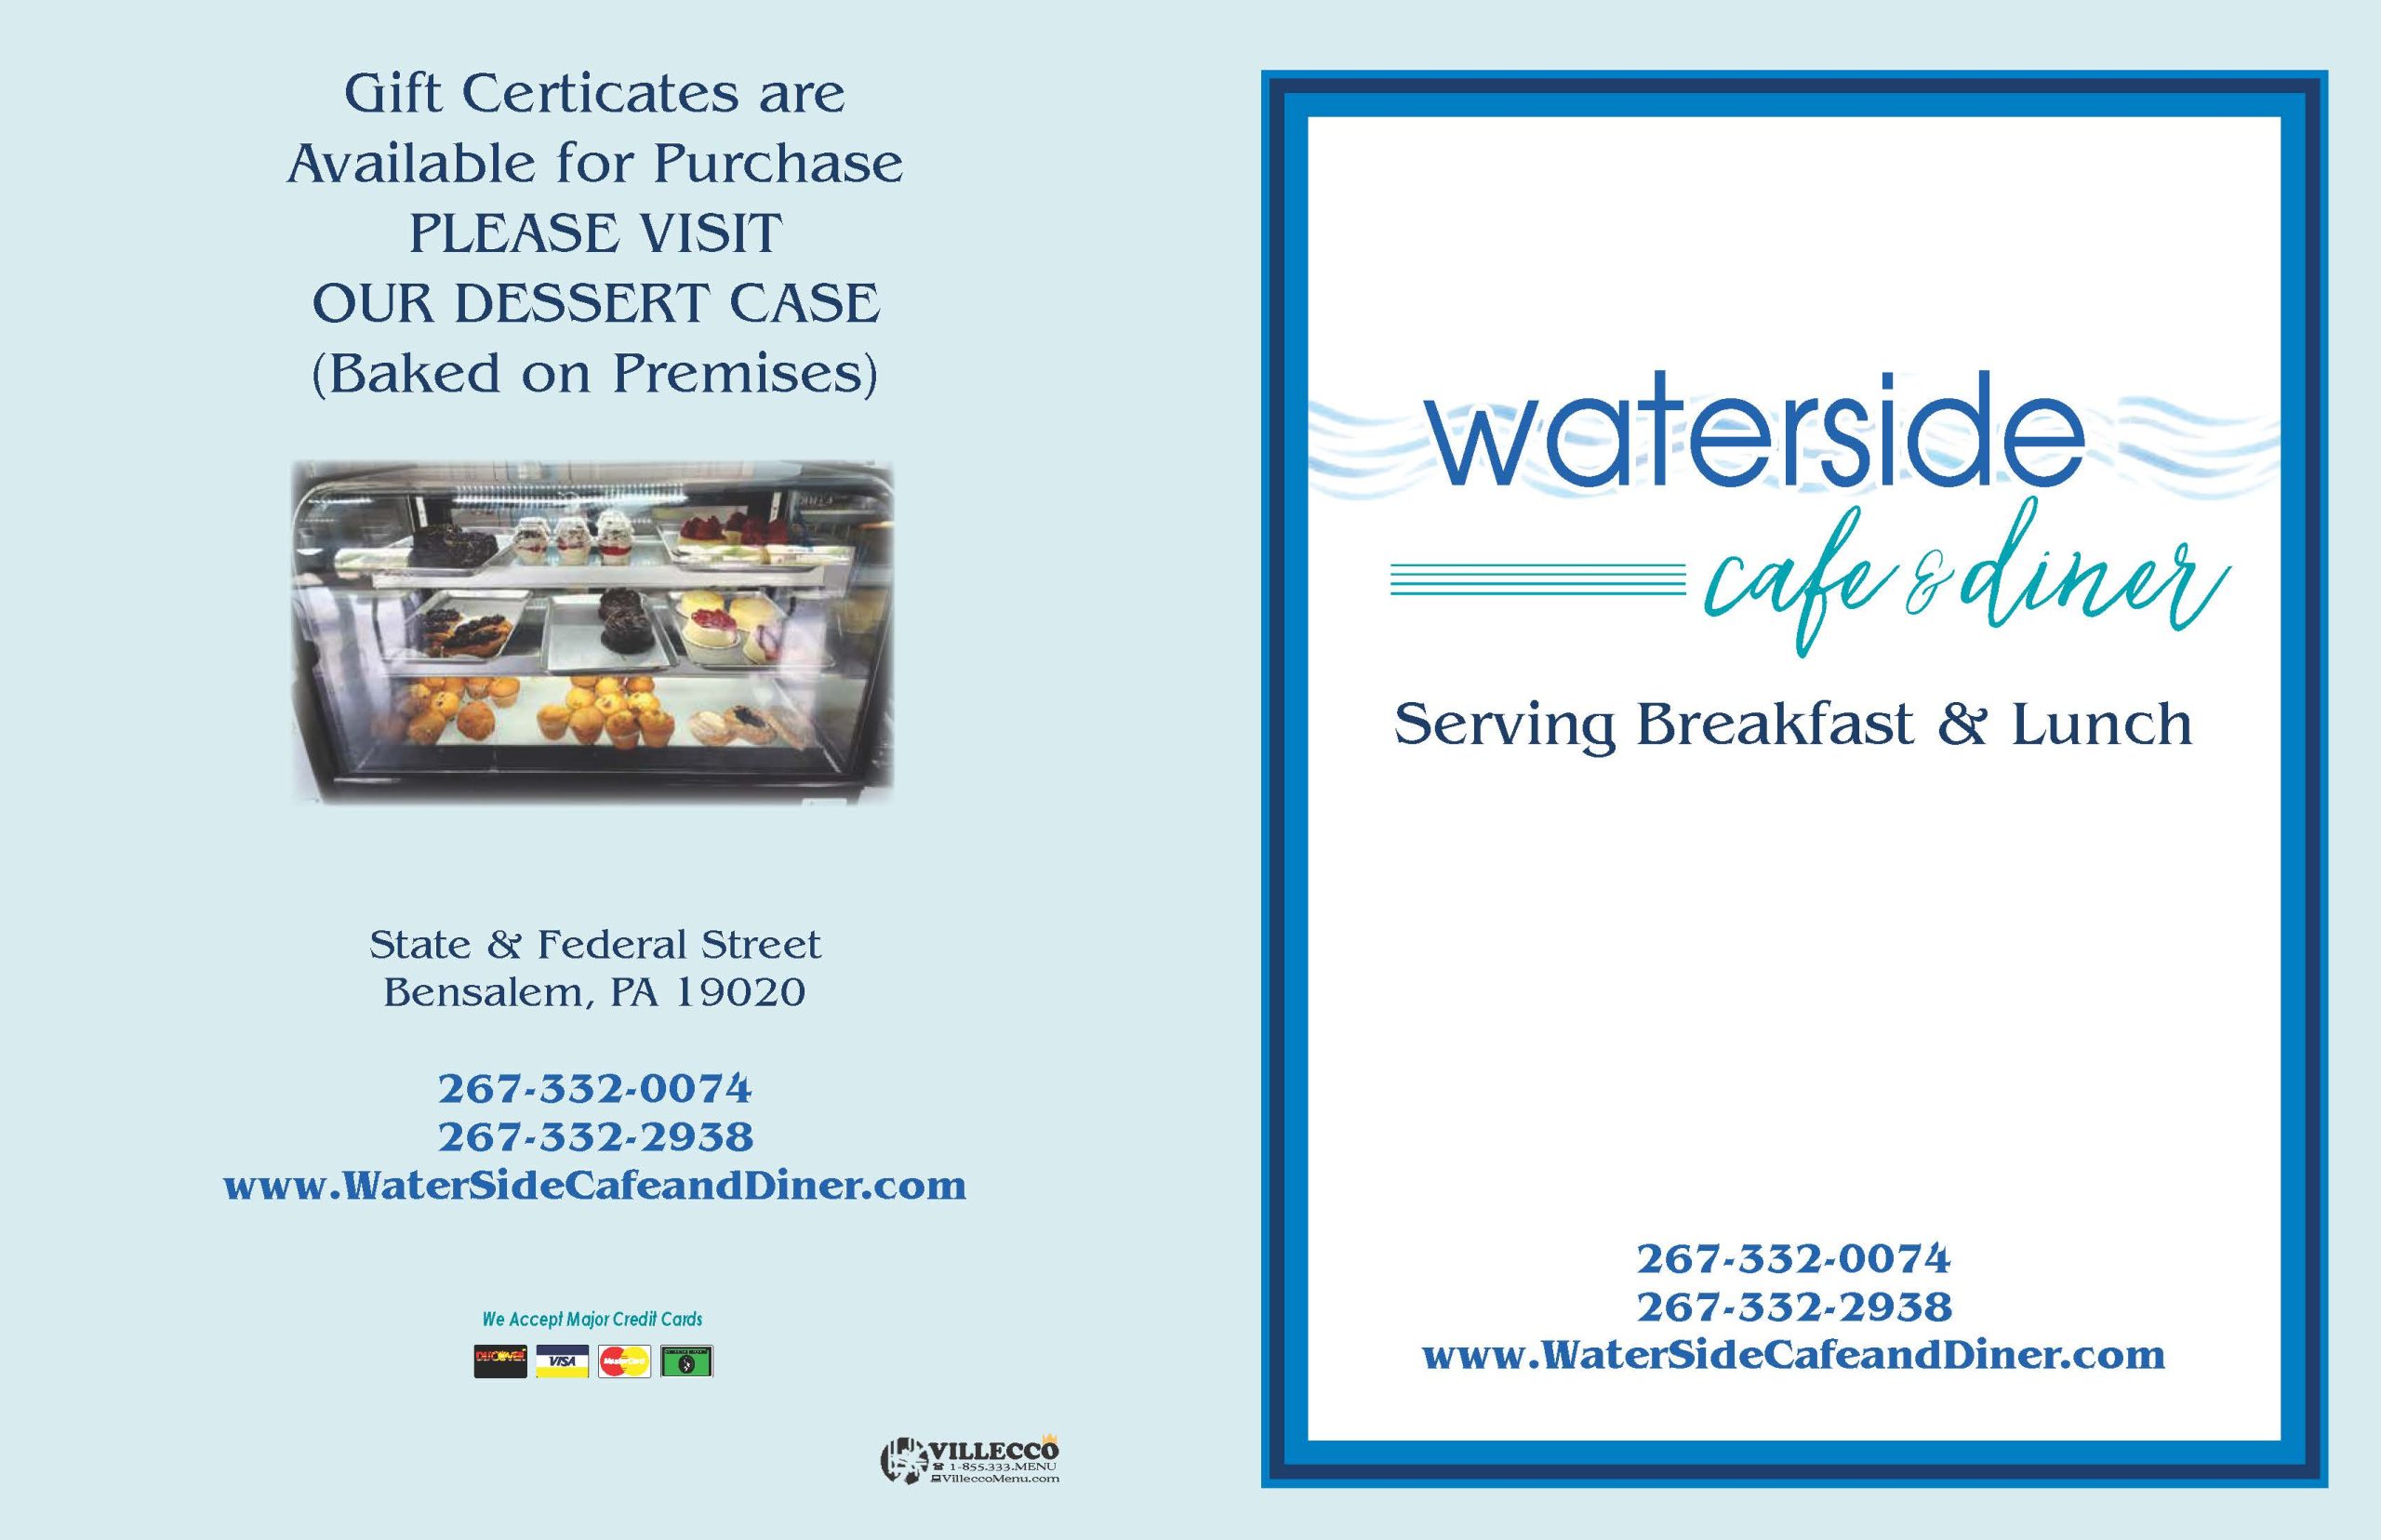 A waterside cafe menu card with a picture of a breakfast and lunch menu.